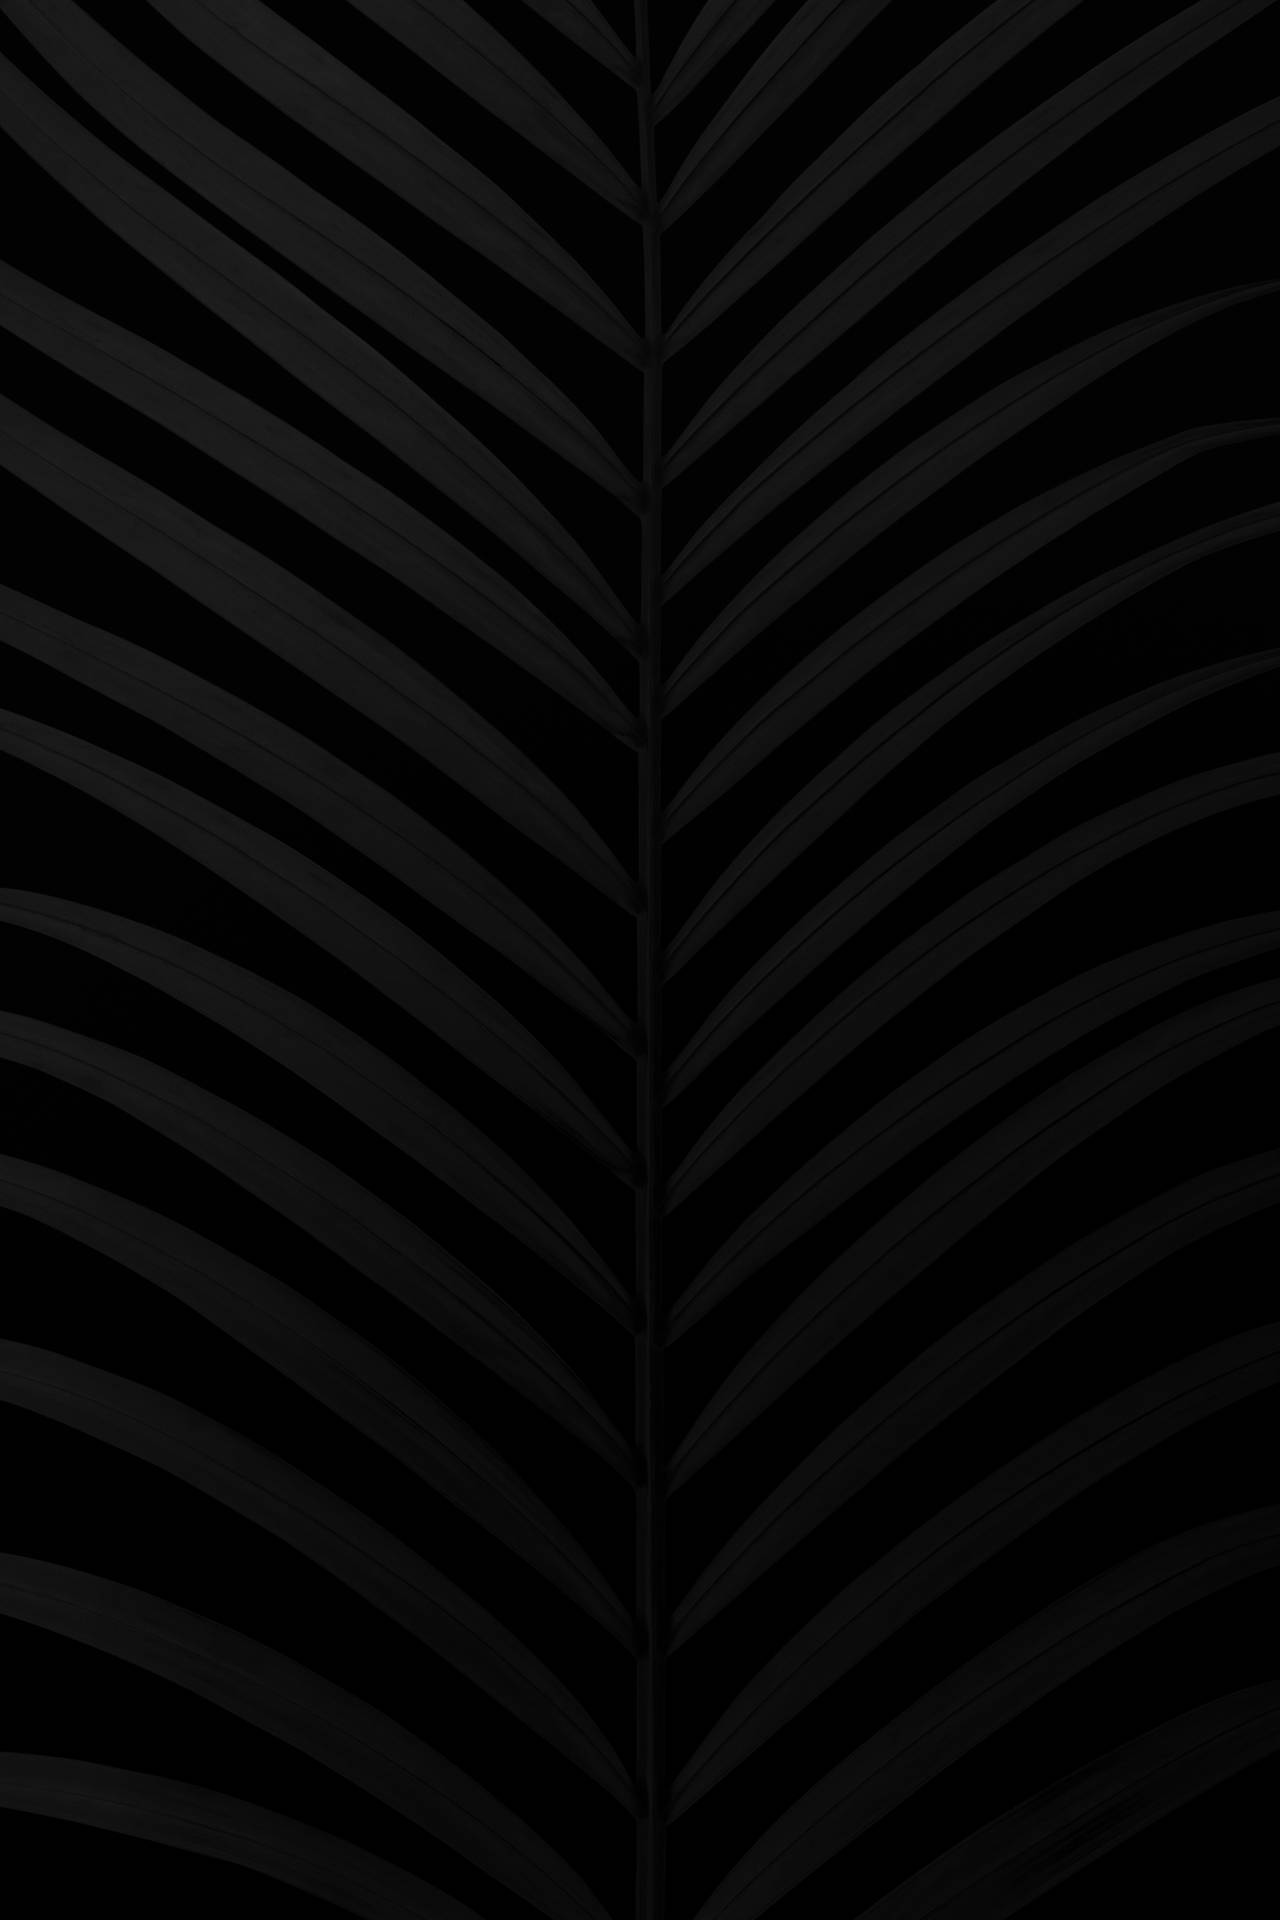 100+] Matte Black Wallpapers for FREE 